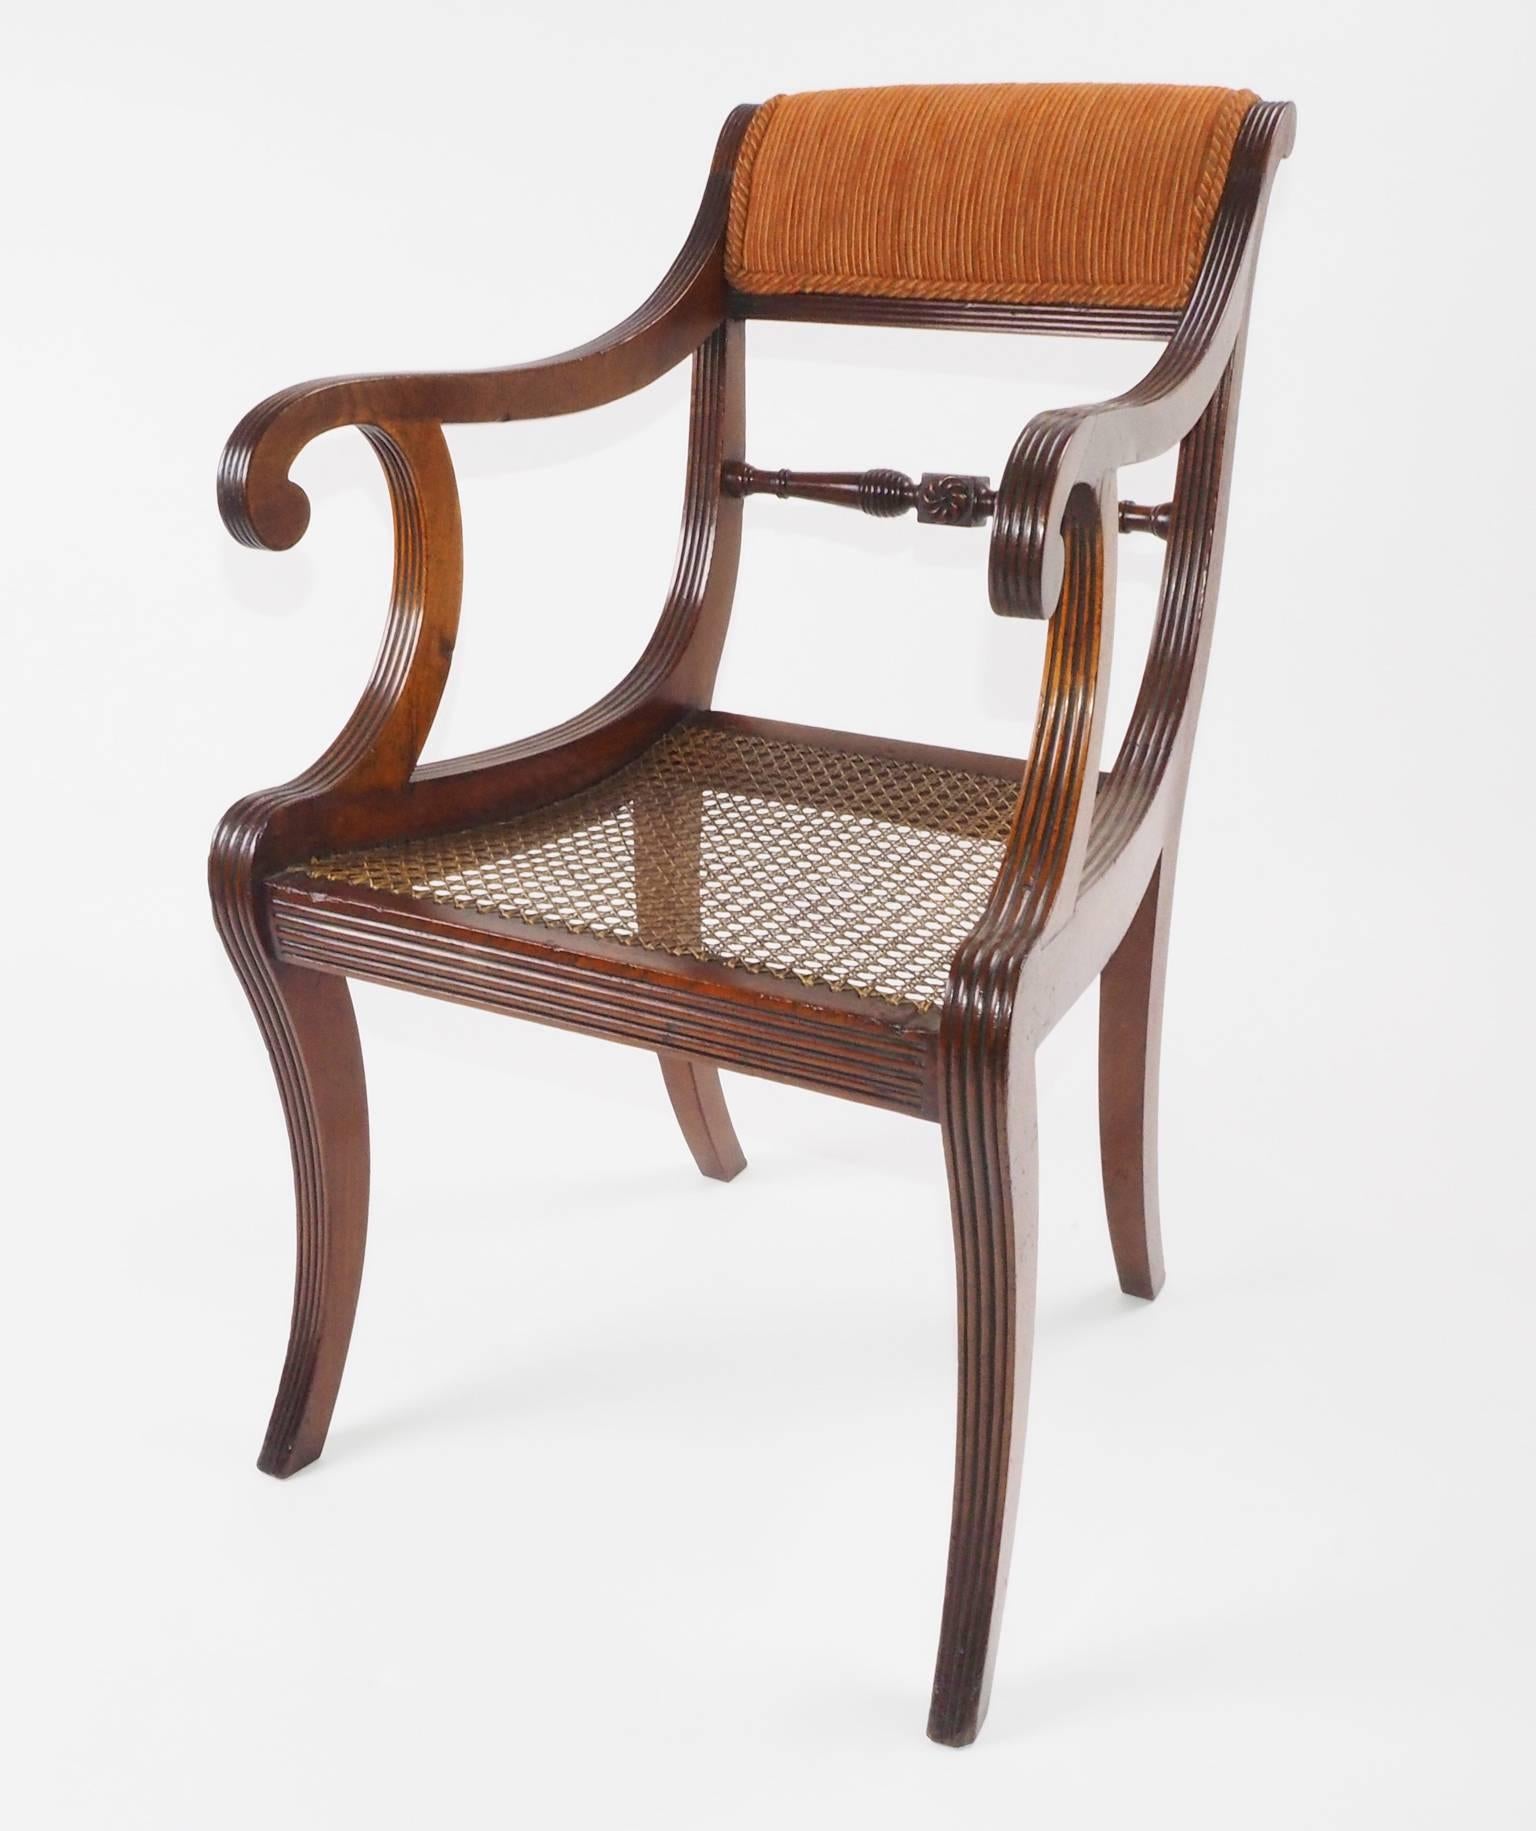 A finely reeded petite elbow chair with old, possibly original caning. It is entirely of
mahogany. Its elegant sabre legs are finely reeded and well proportioned. The underside of the 
front bar has the journeyman's stamp 'BC'. Gillows allowed